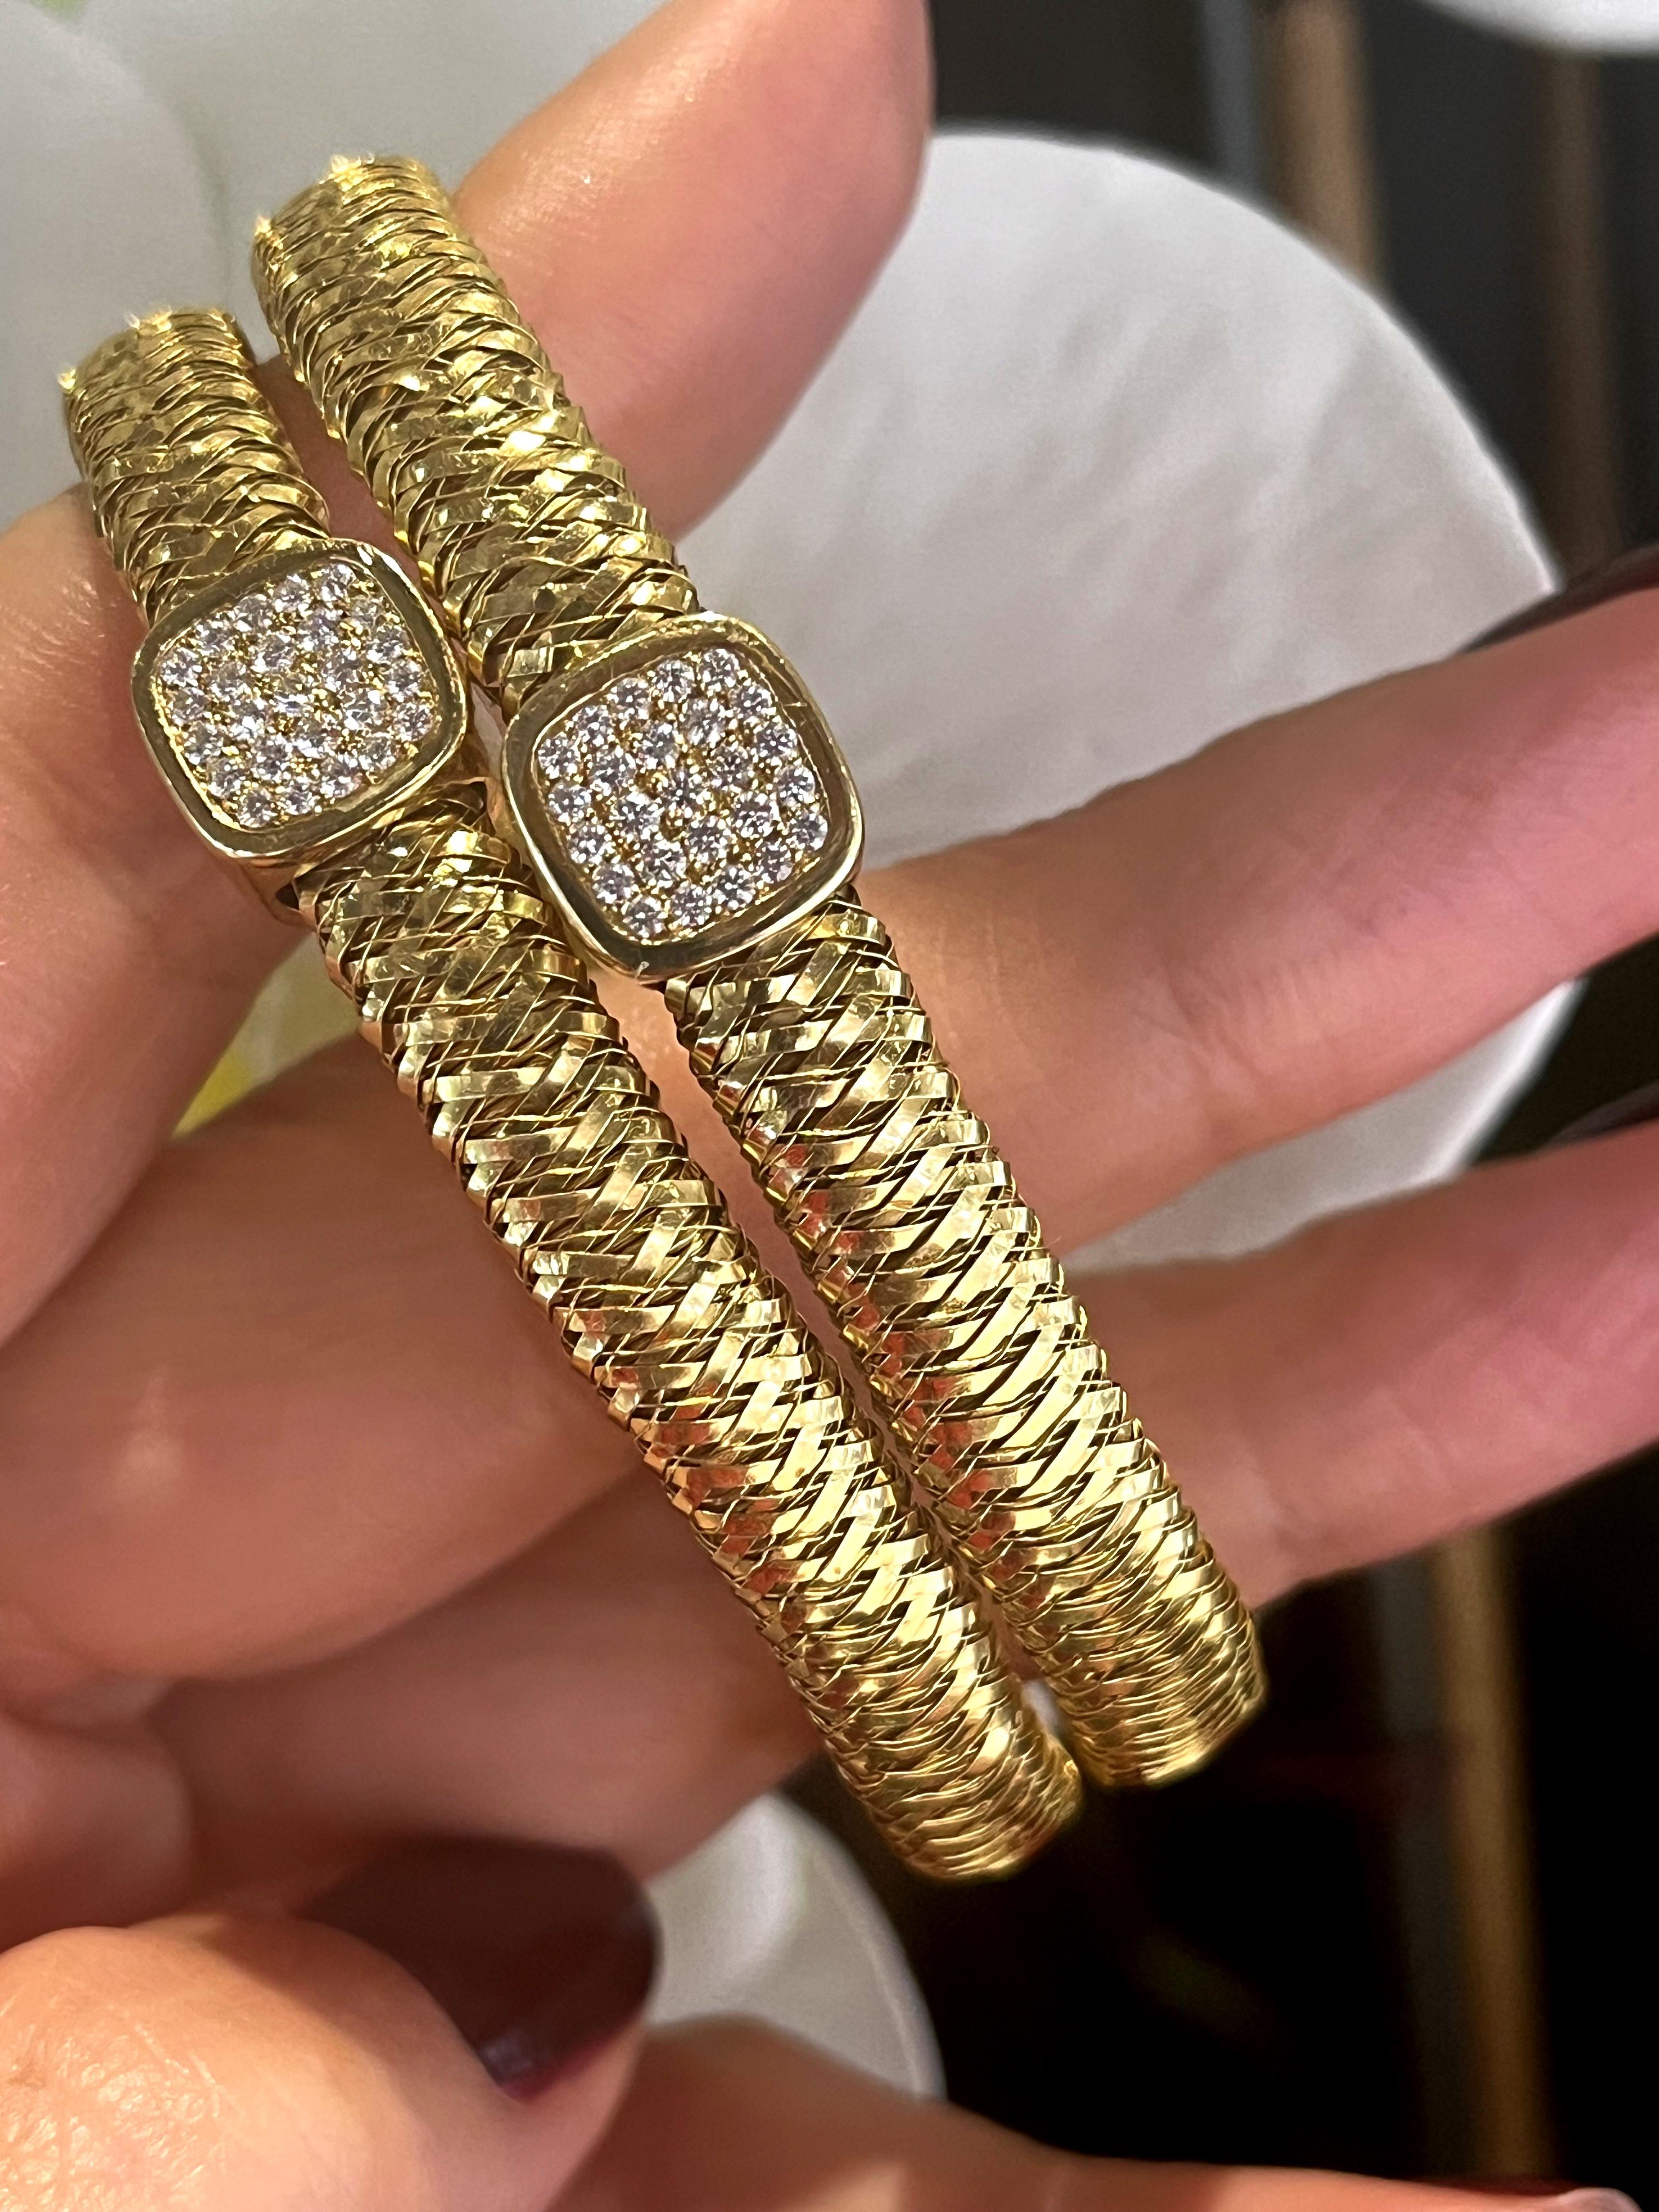 *** ITEMS CAN BE SOLD SEPARATELY, PLEASE CONTACT US SHOULD YOU WISH SO ***

Brand: Roberto Coin

Collection: Primavera

Style: Bangle (Flexible)

Metal: 18k Yellow Gold

Stones: Round cut diamonds 0.25ct each bangle

Size: Fits wrist up to 7